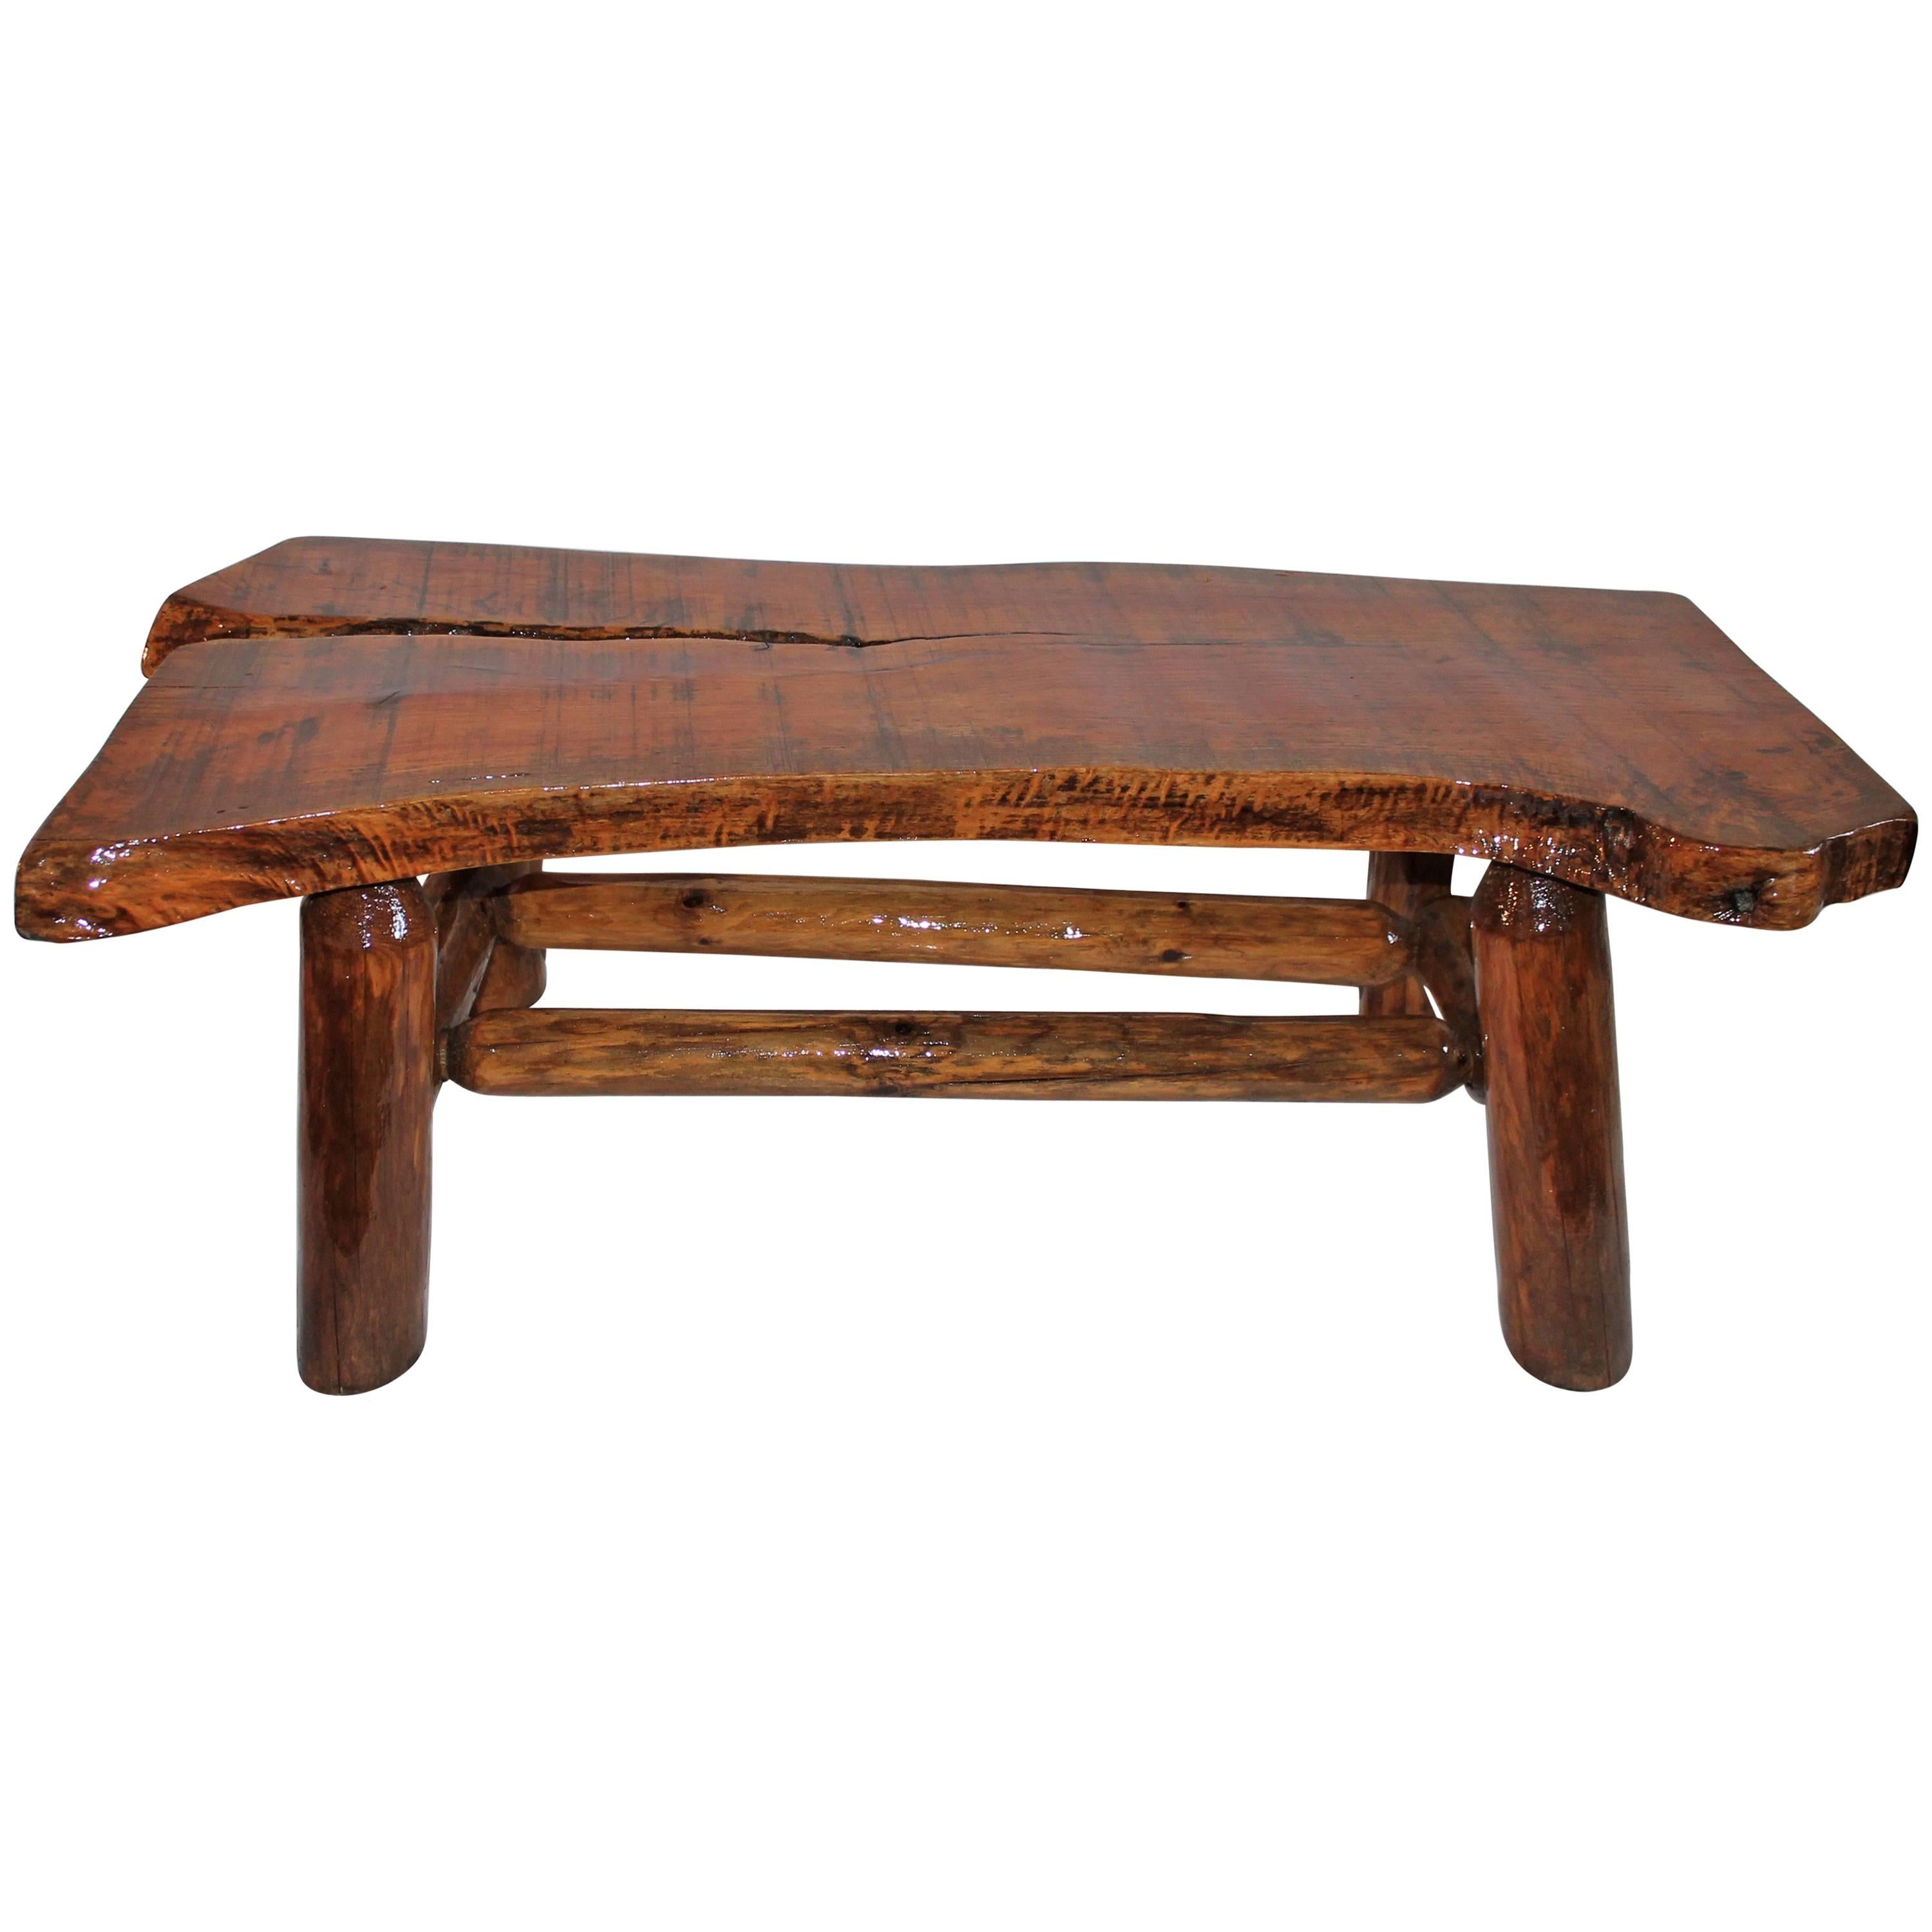 Rustic Coffee Table or Bench from Midwest